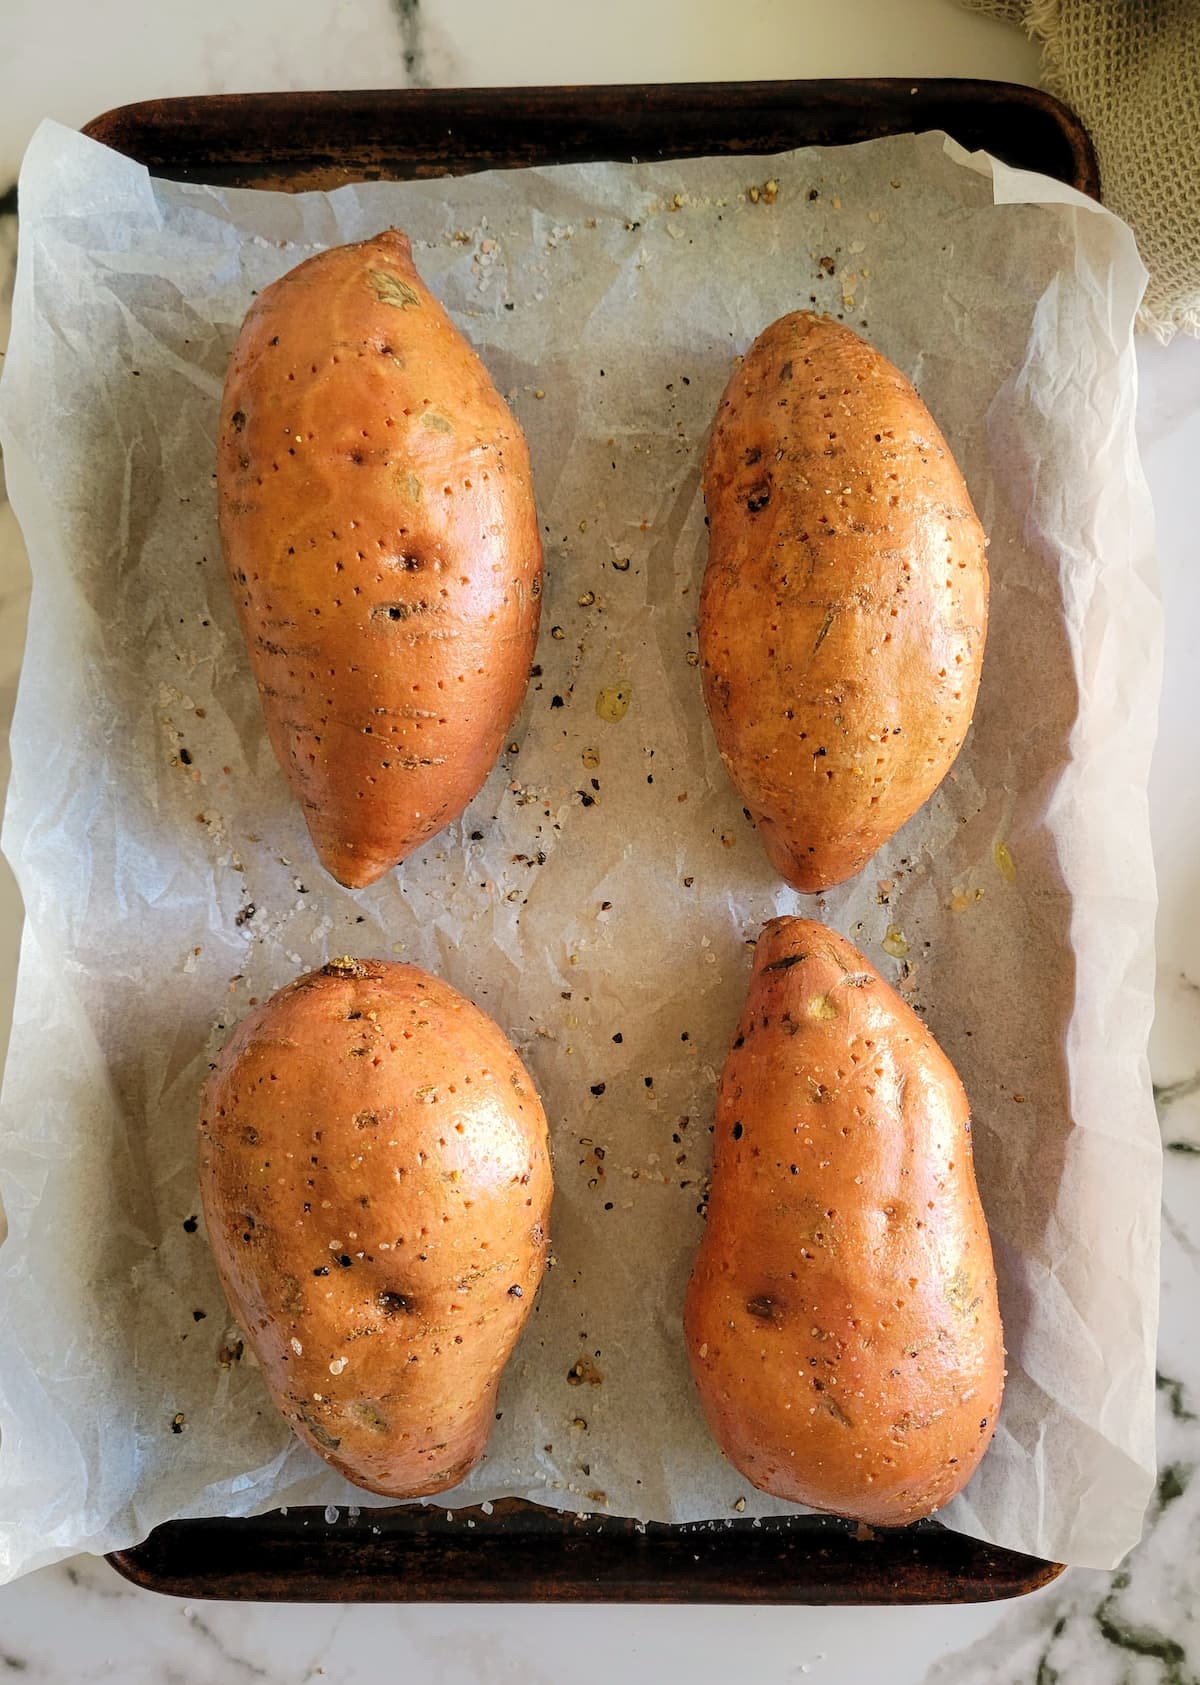 4 sweet potatoes seasoned with salt and pepper on a parchment lined baking sheet